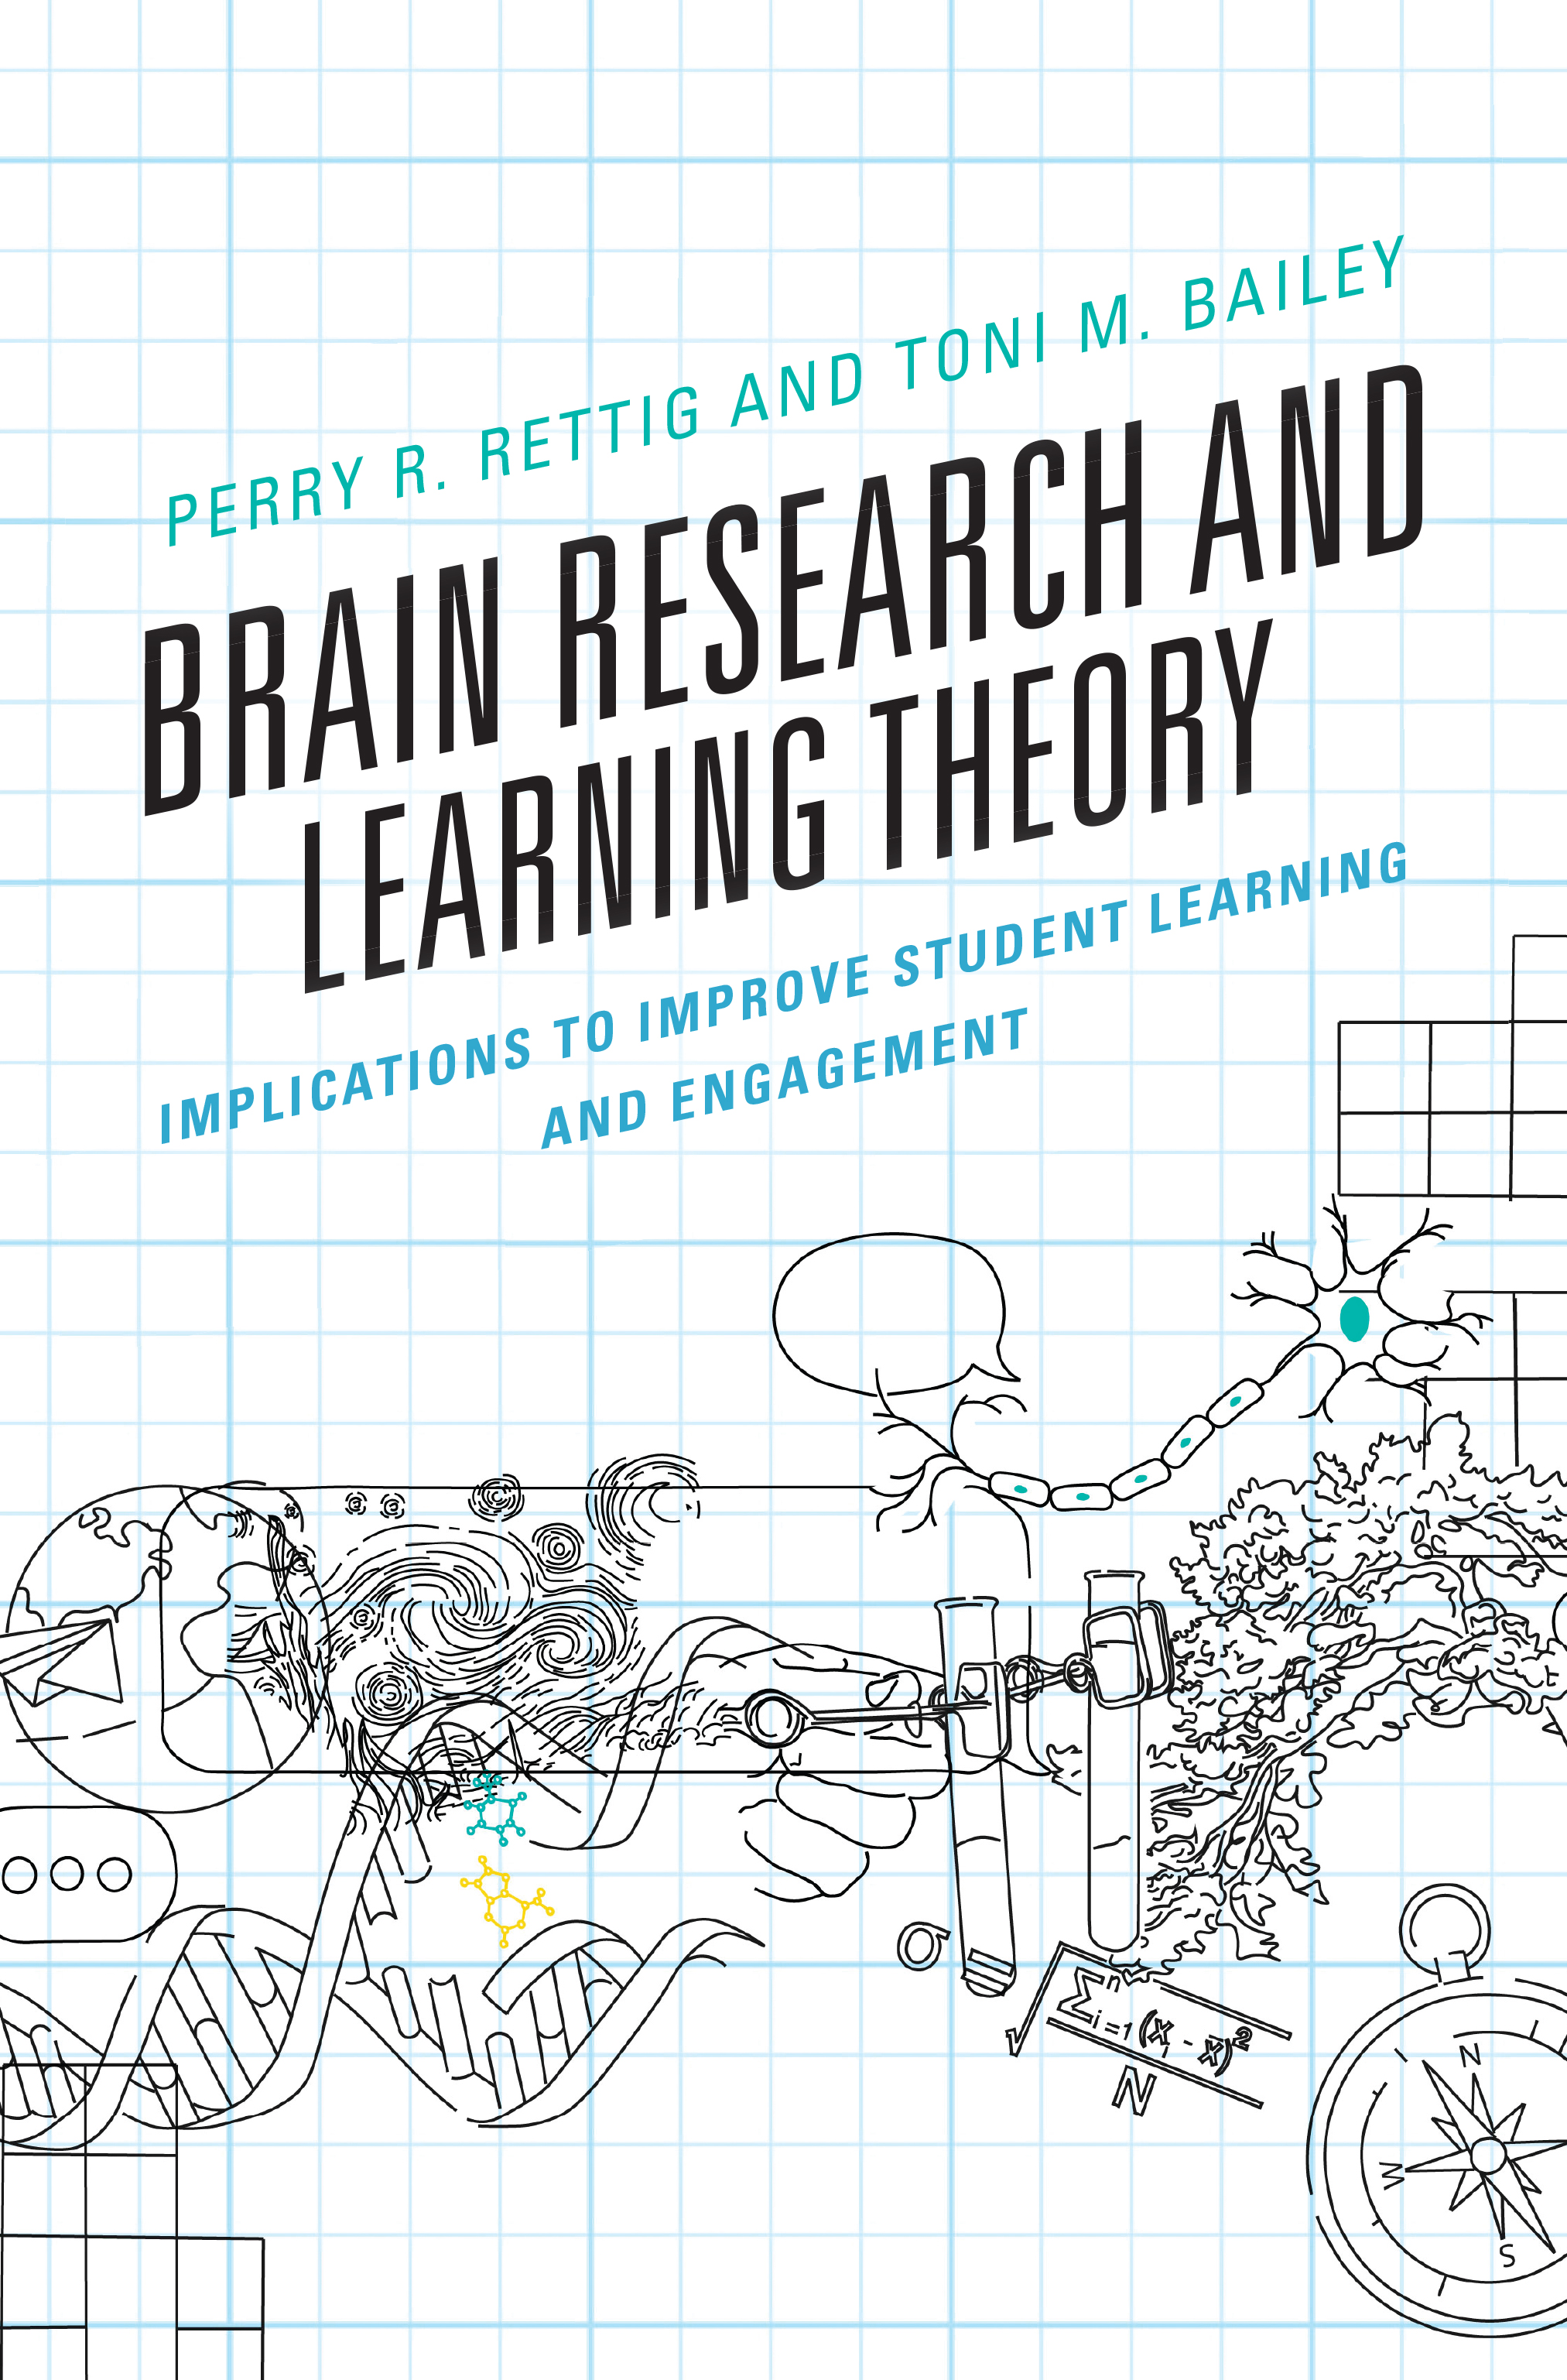 Brain Research and Learning Theory: Implications to Improve Student Learning and Engagement